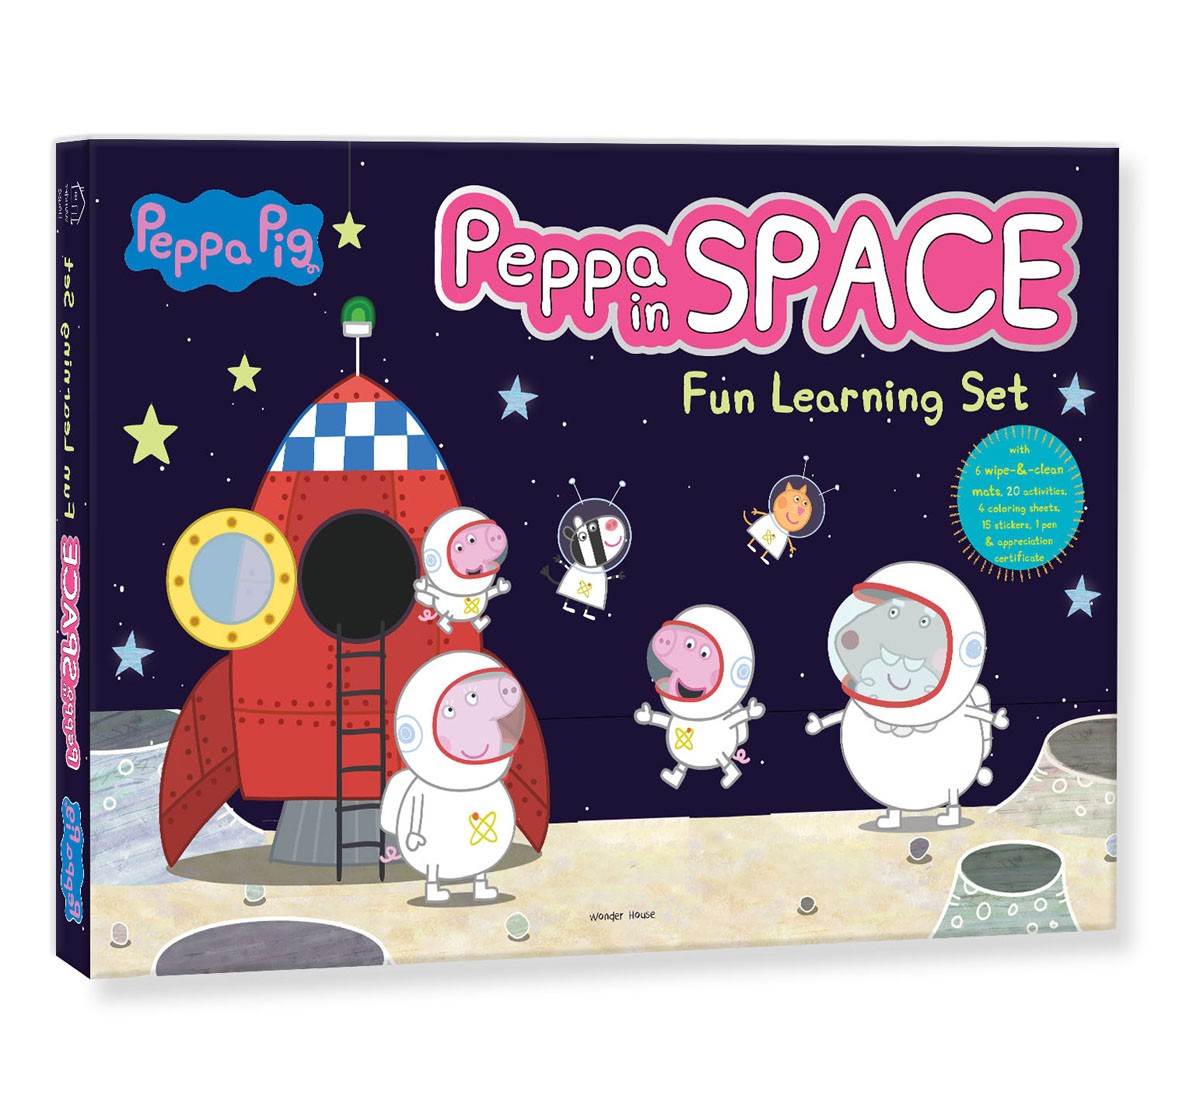 Wonder House Books Peppa In Space Fun Learning Activity Set for kids 3Y+, Multicolour